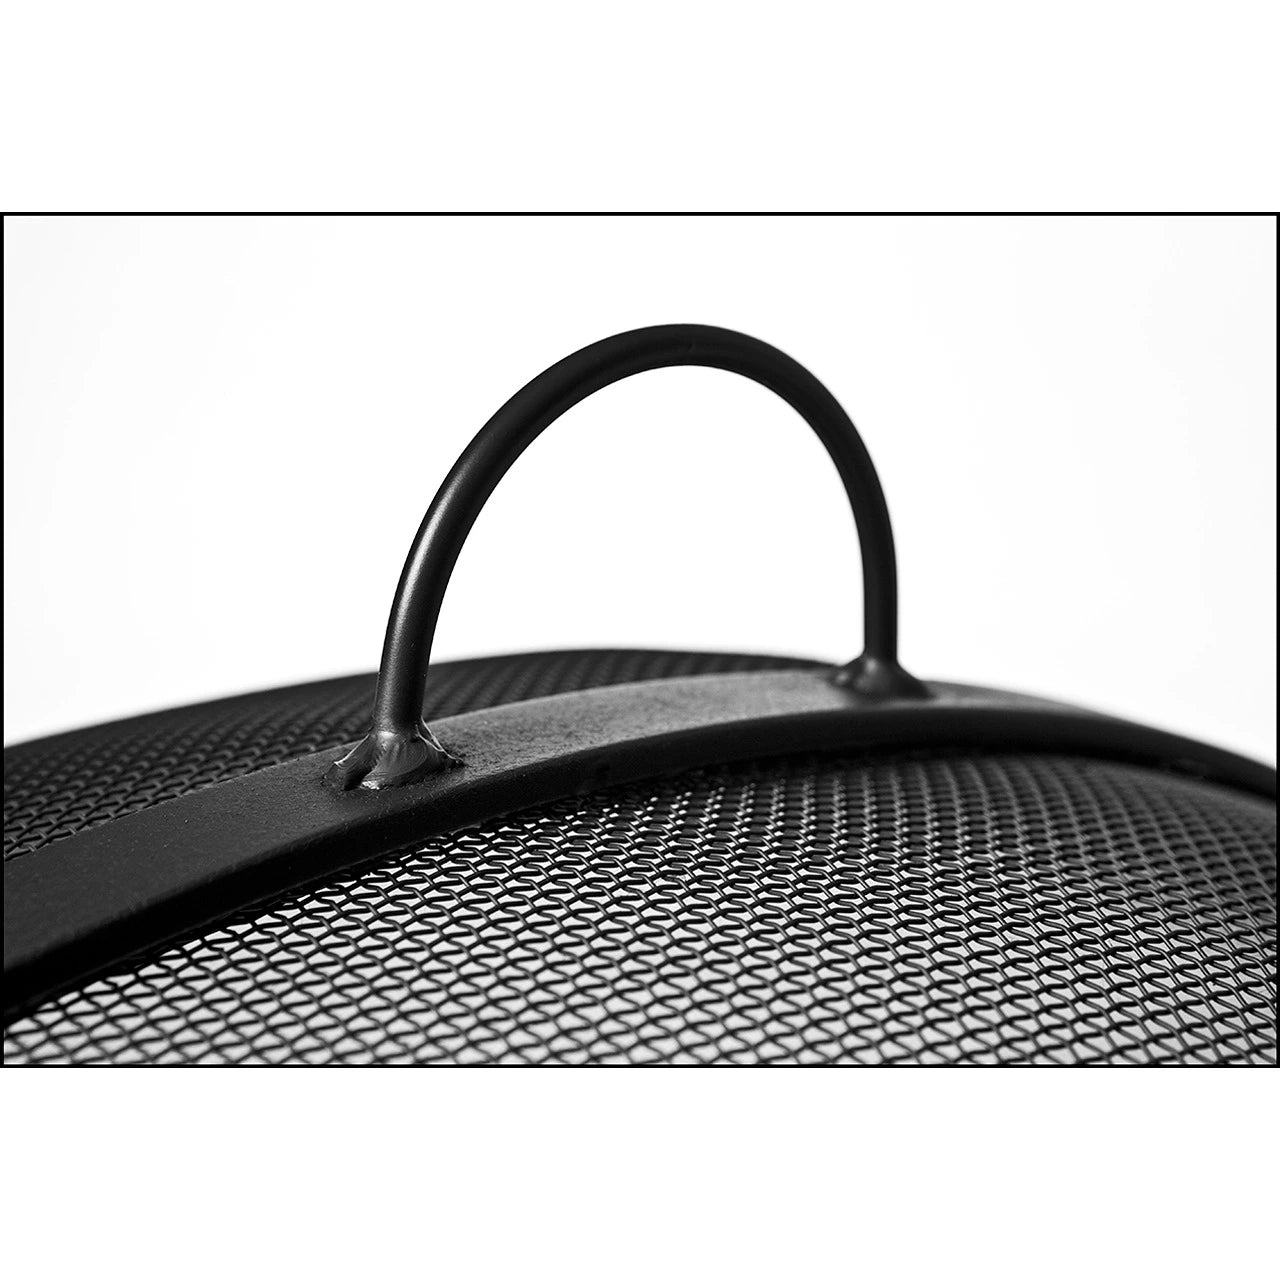 Dome Fire Pit Cover | Steel |  Lift Off Dome Round Fire Pit Screen Cover 